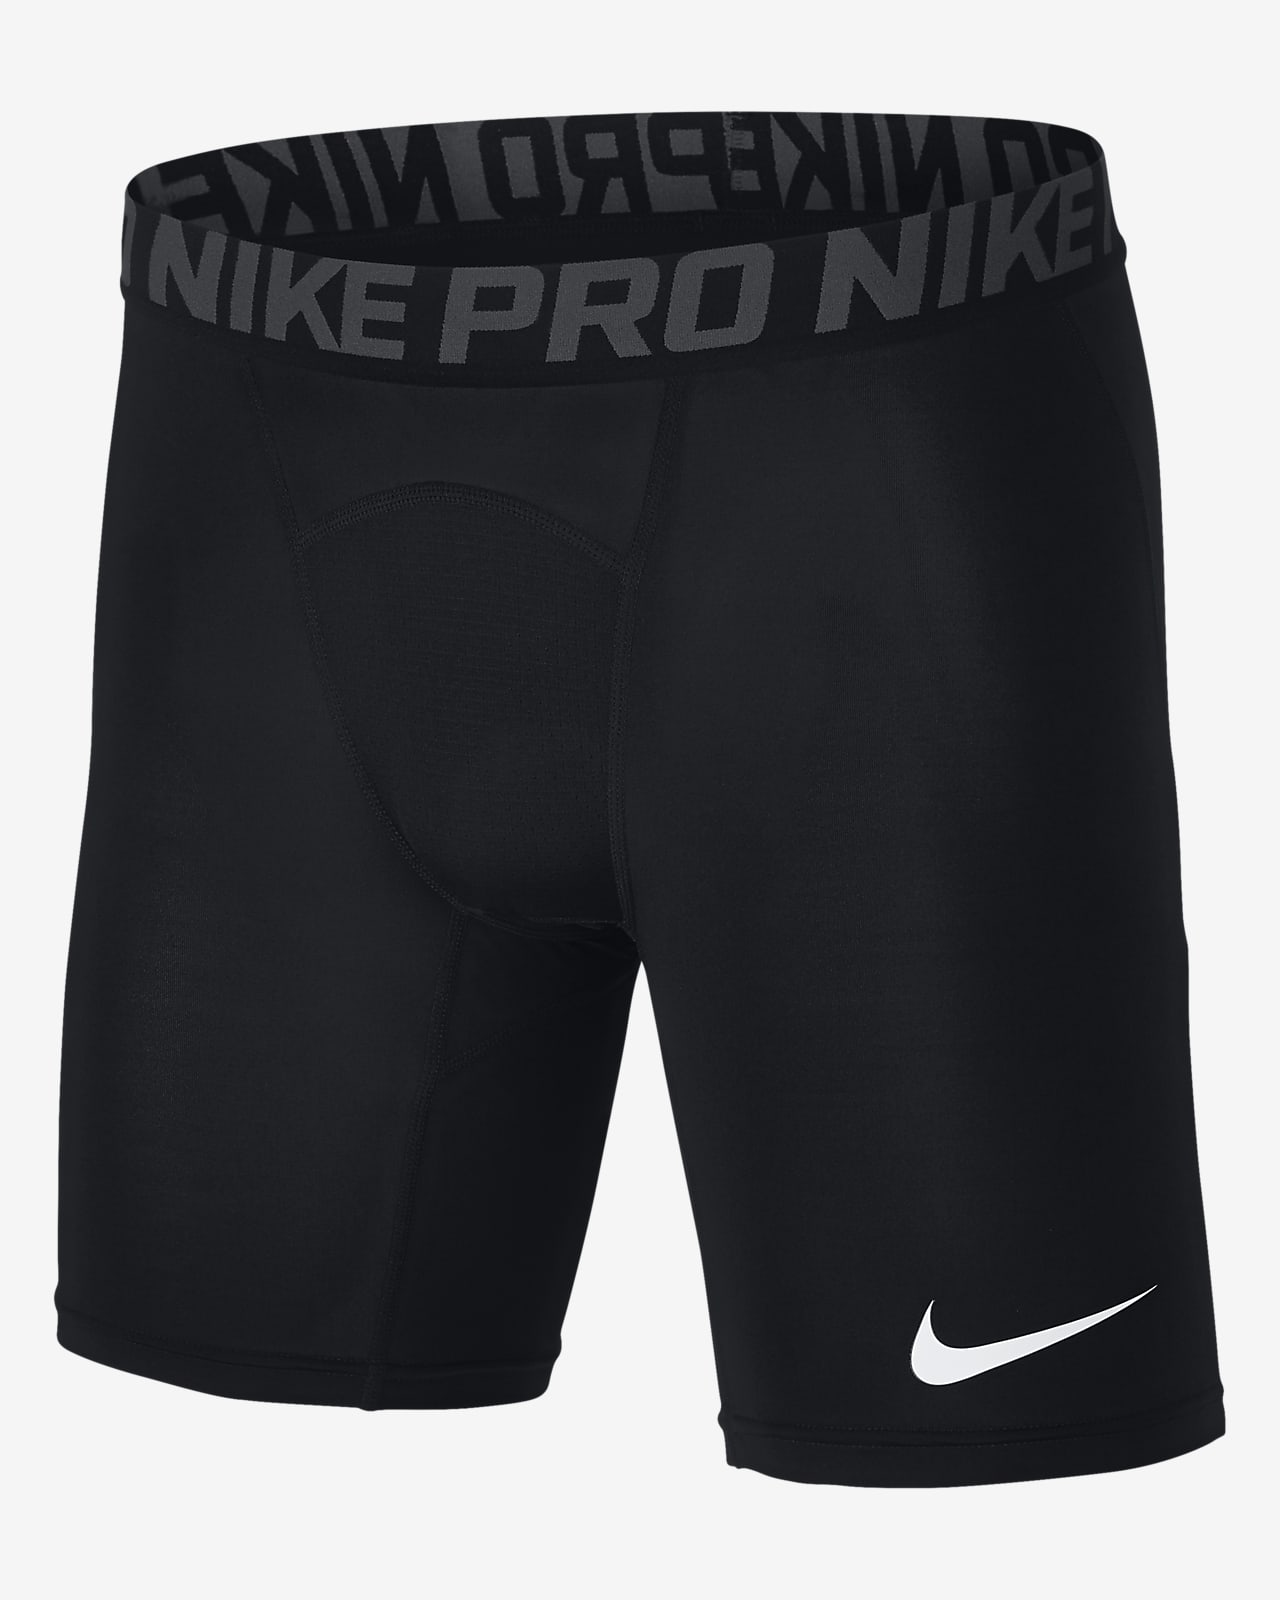 where to buy 'pro shorts in philippines